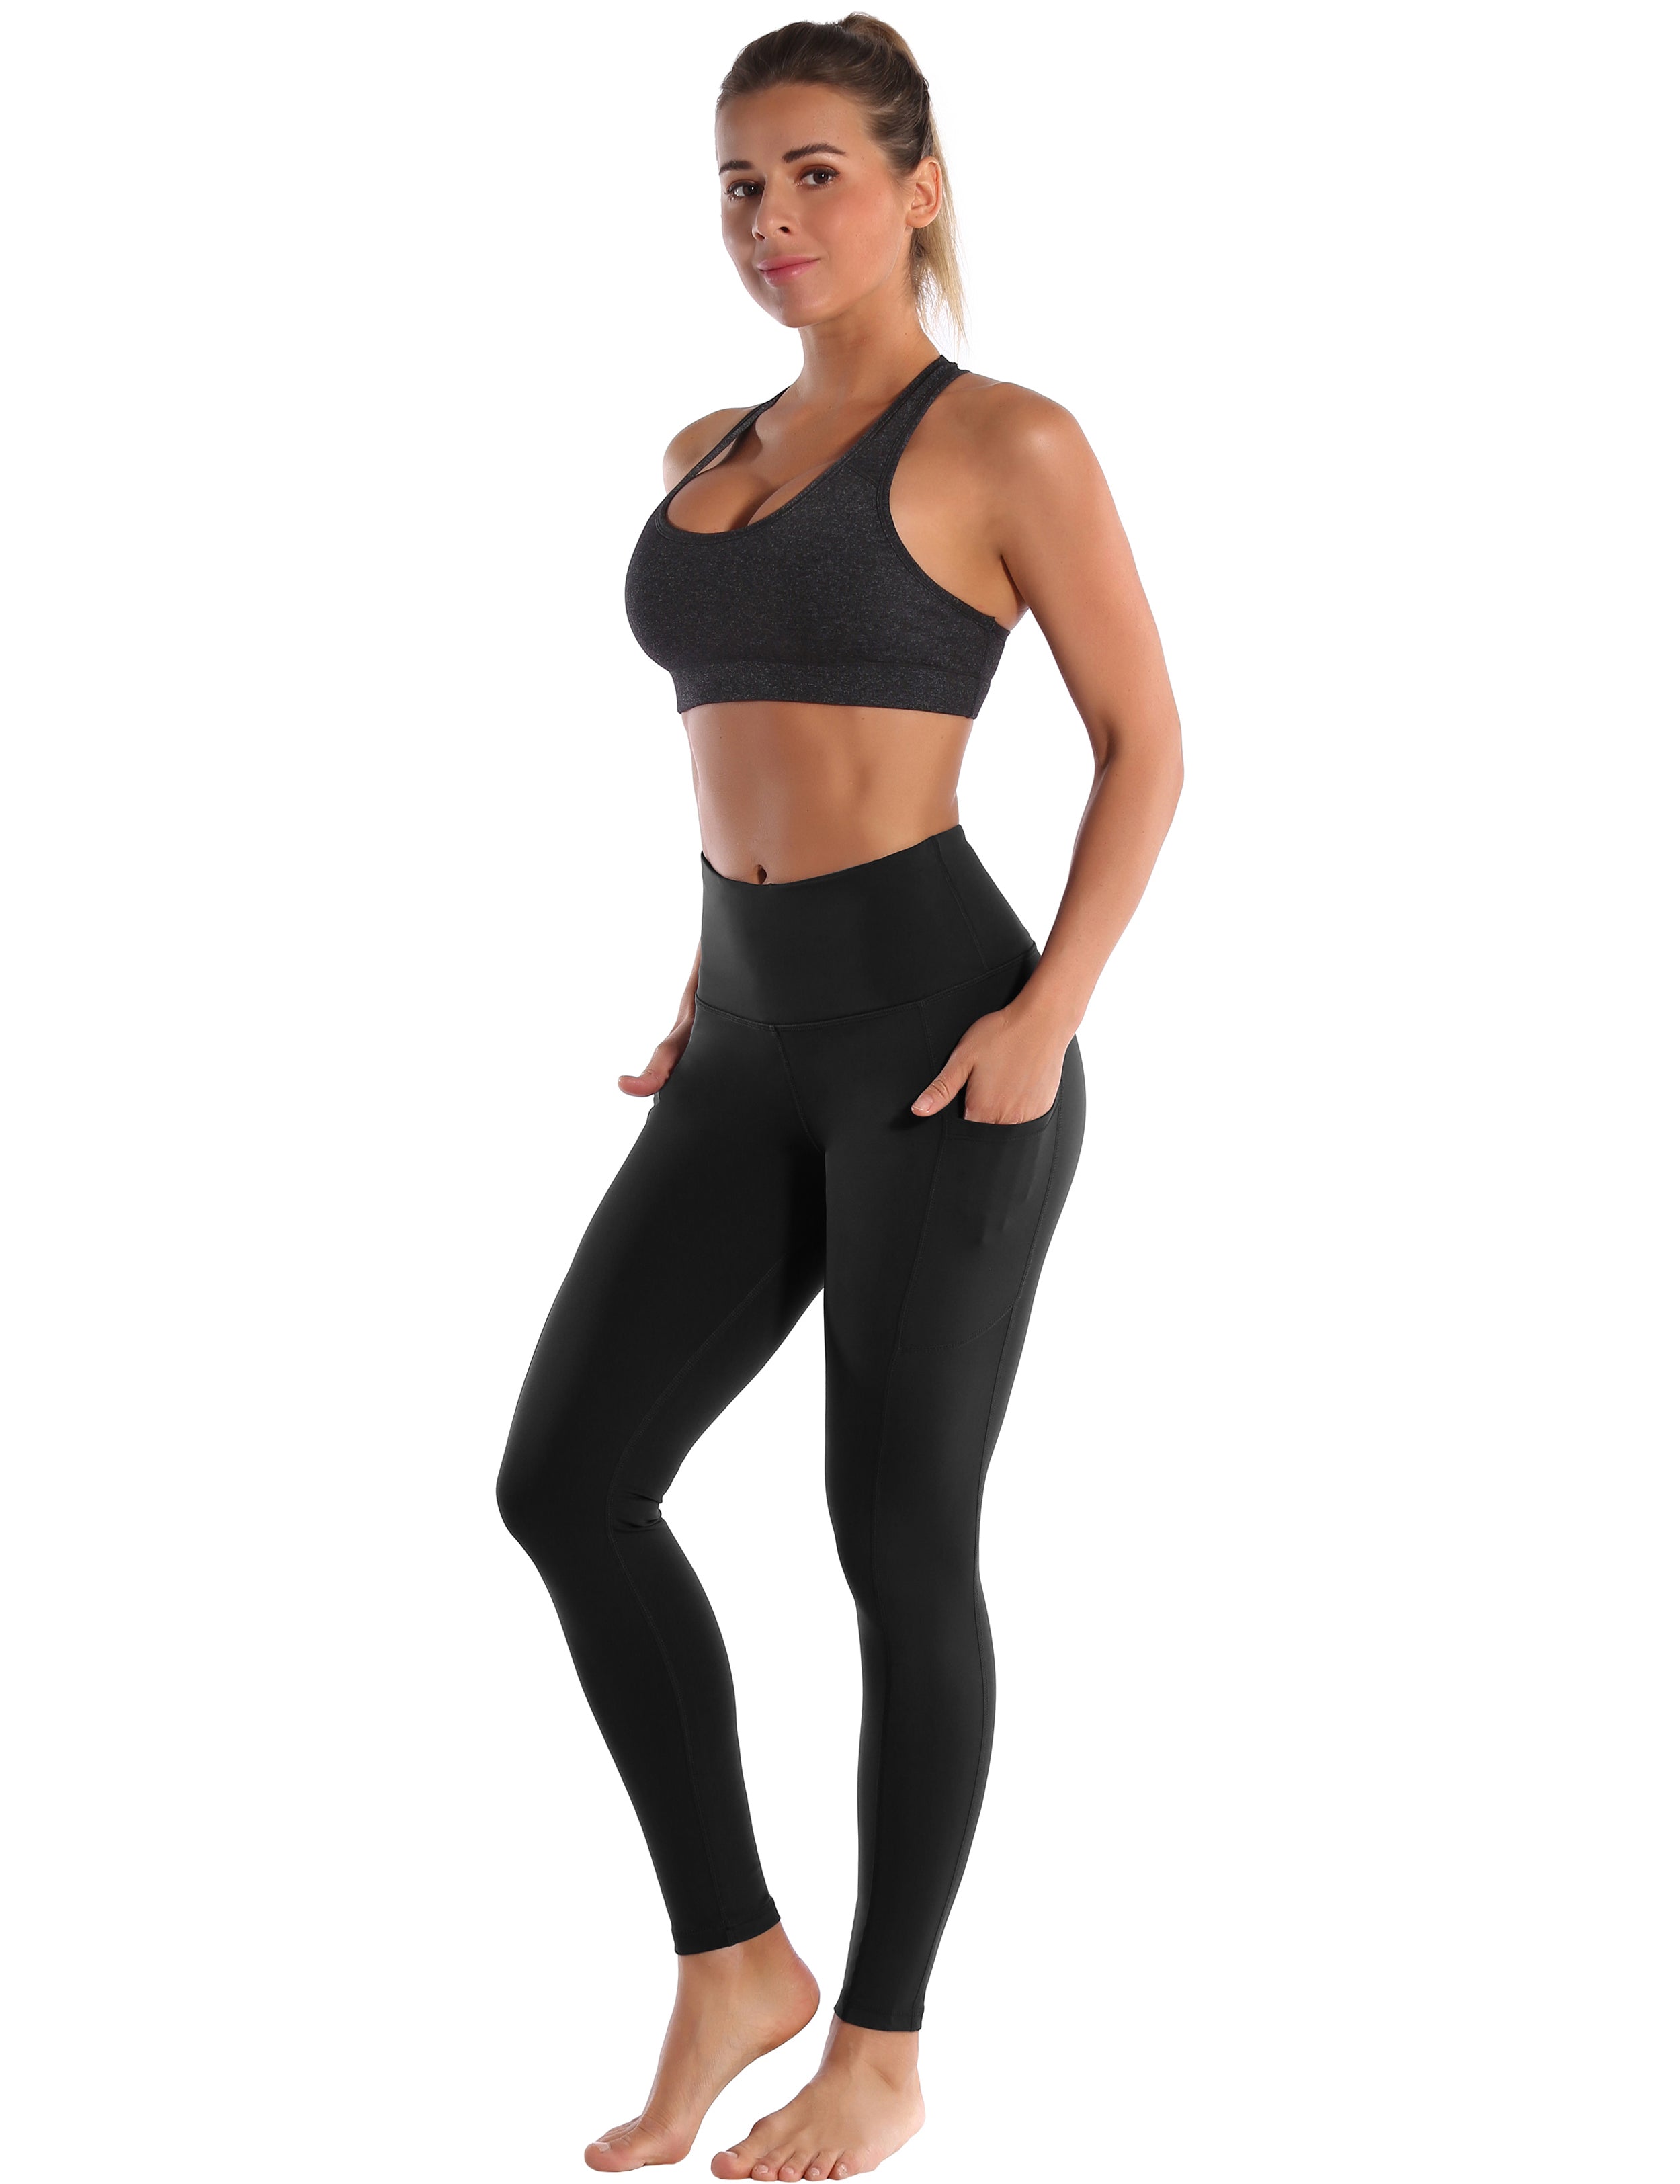 Hip Line Side Pockets Golf Pants black Sexy Hip Line Side Pockets 75%Nylon/25%Spandex Fabric doesn't attract lint easily 4-way stretch No see-through Moisture-wicking Tummy control Inner pocket Two lengths